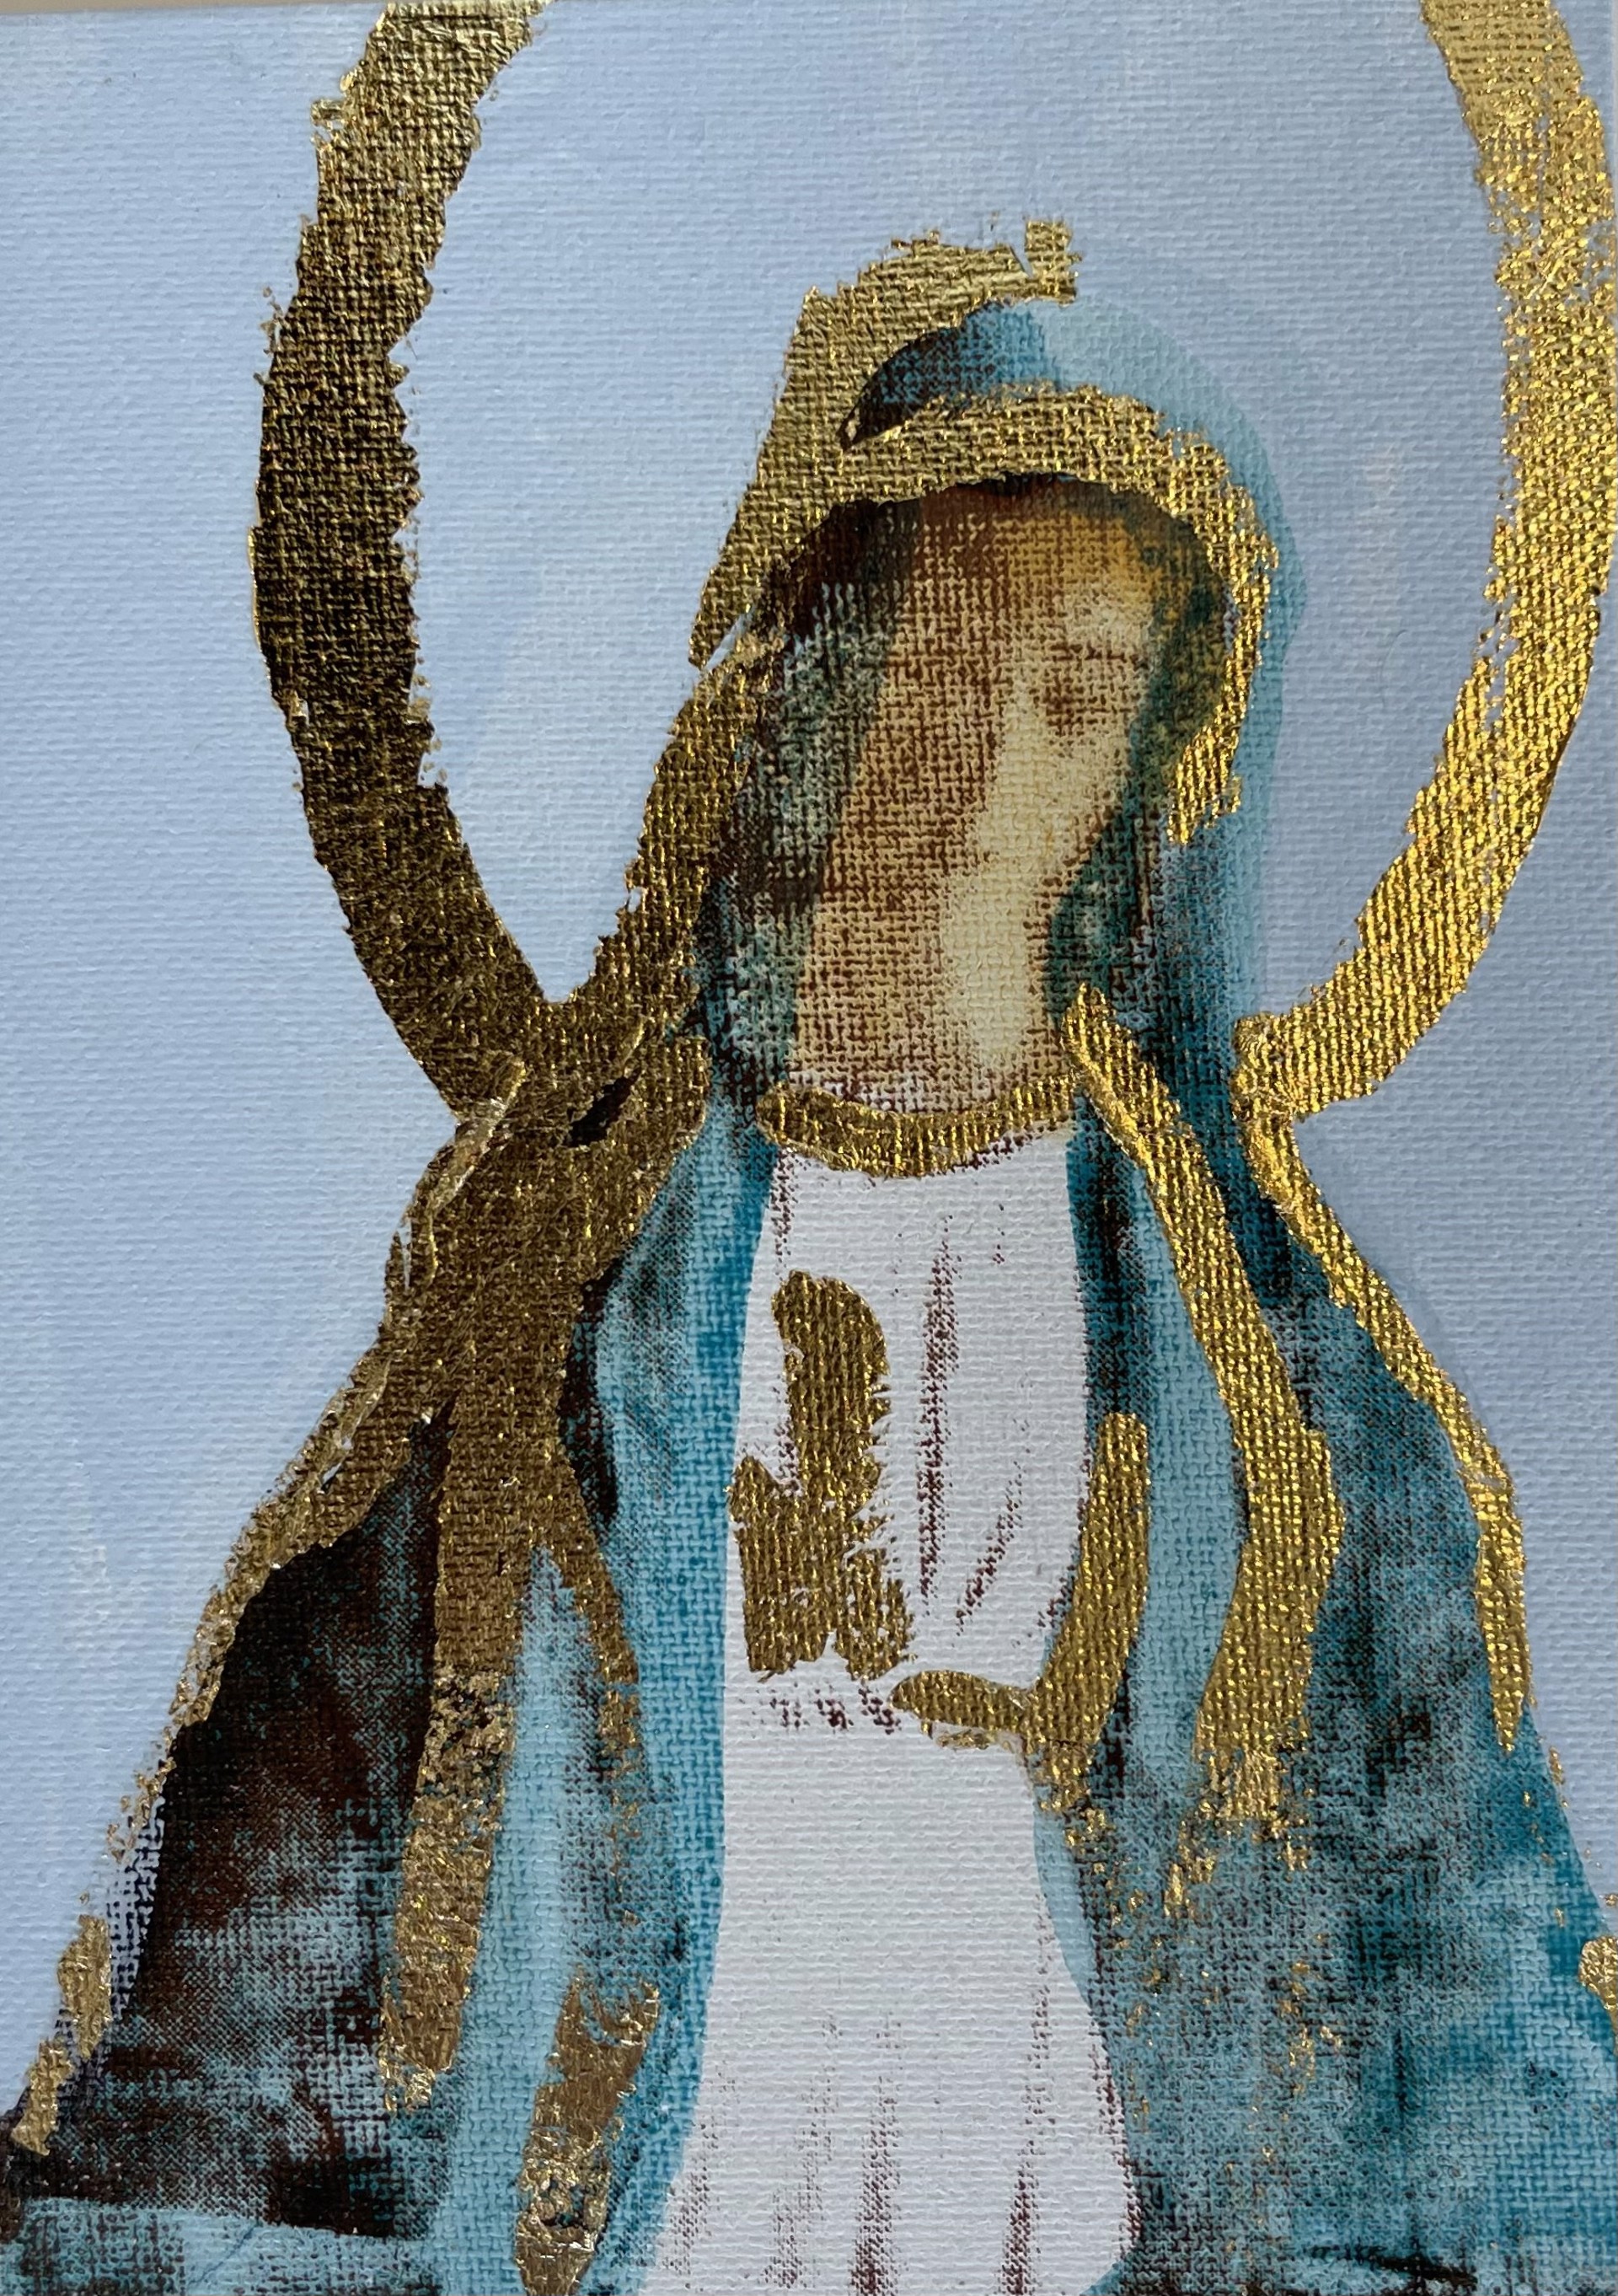 Hail Mary 1 by Megan Coonelly